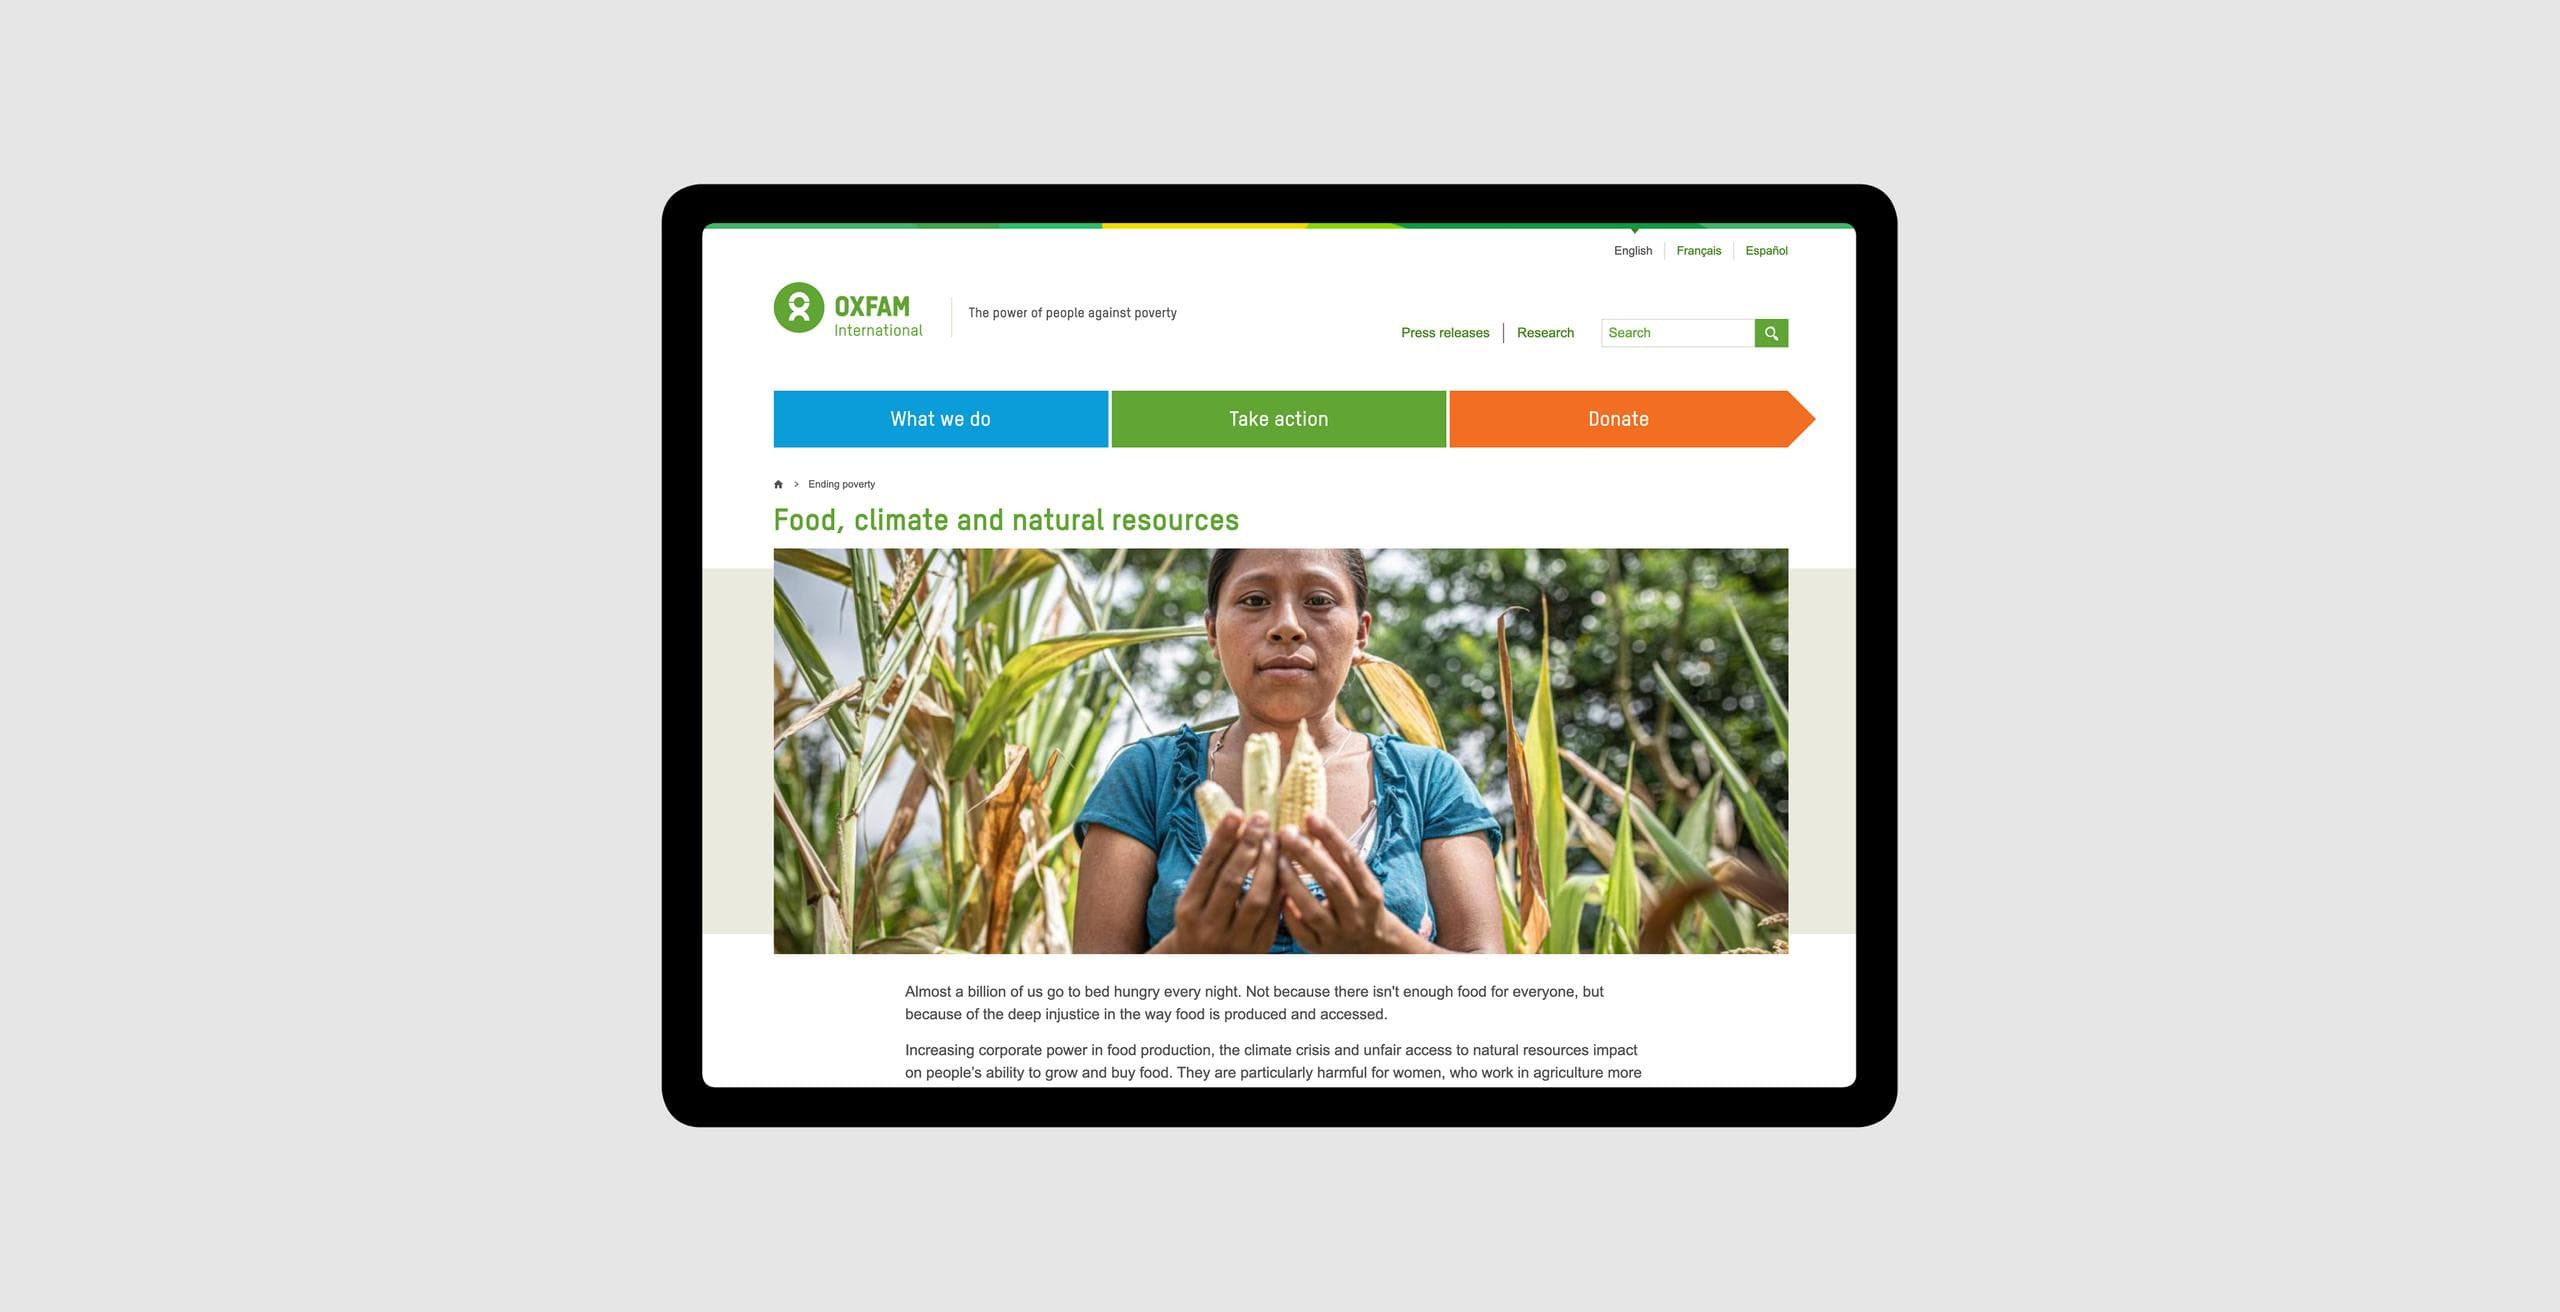 Food, climate and natural resources page on a tablet